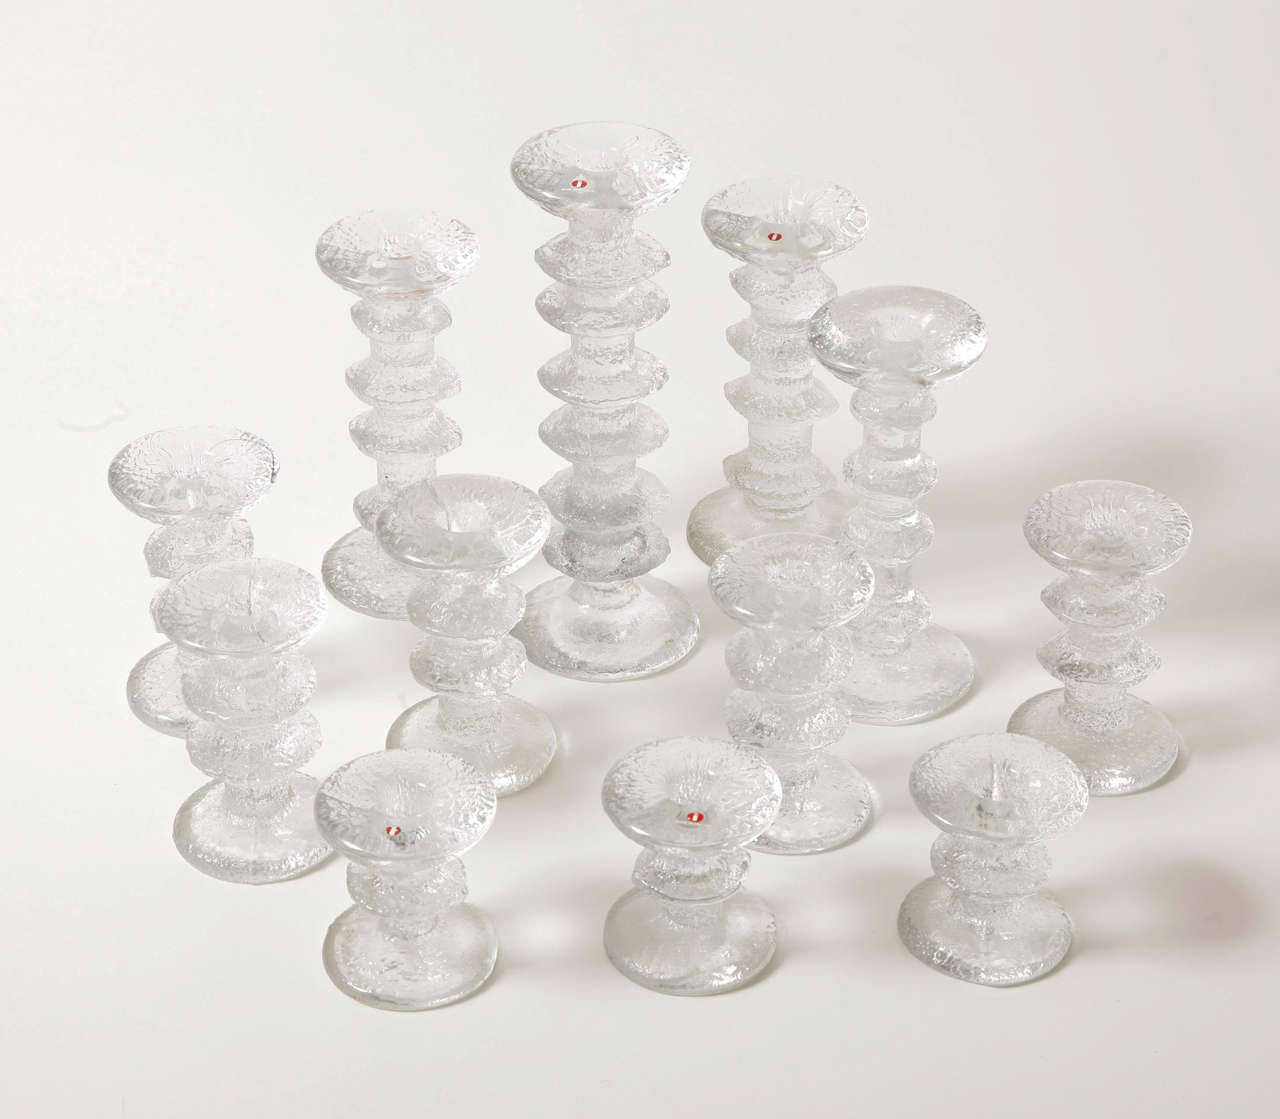 A set of twelve glass candleholders 'Festivo' by Timo Sarpaneva.
Produced by Littala.
Four sizes.
H. 8.5 x diam. 7.2 cm (3x).
H. 12.5 x diam. 7.5 cm (5x).
H. 18.5 x diam. 8.5 cm (3x).
H. 25 x diam. 9.2 (1x).
Vintage.